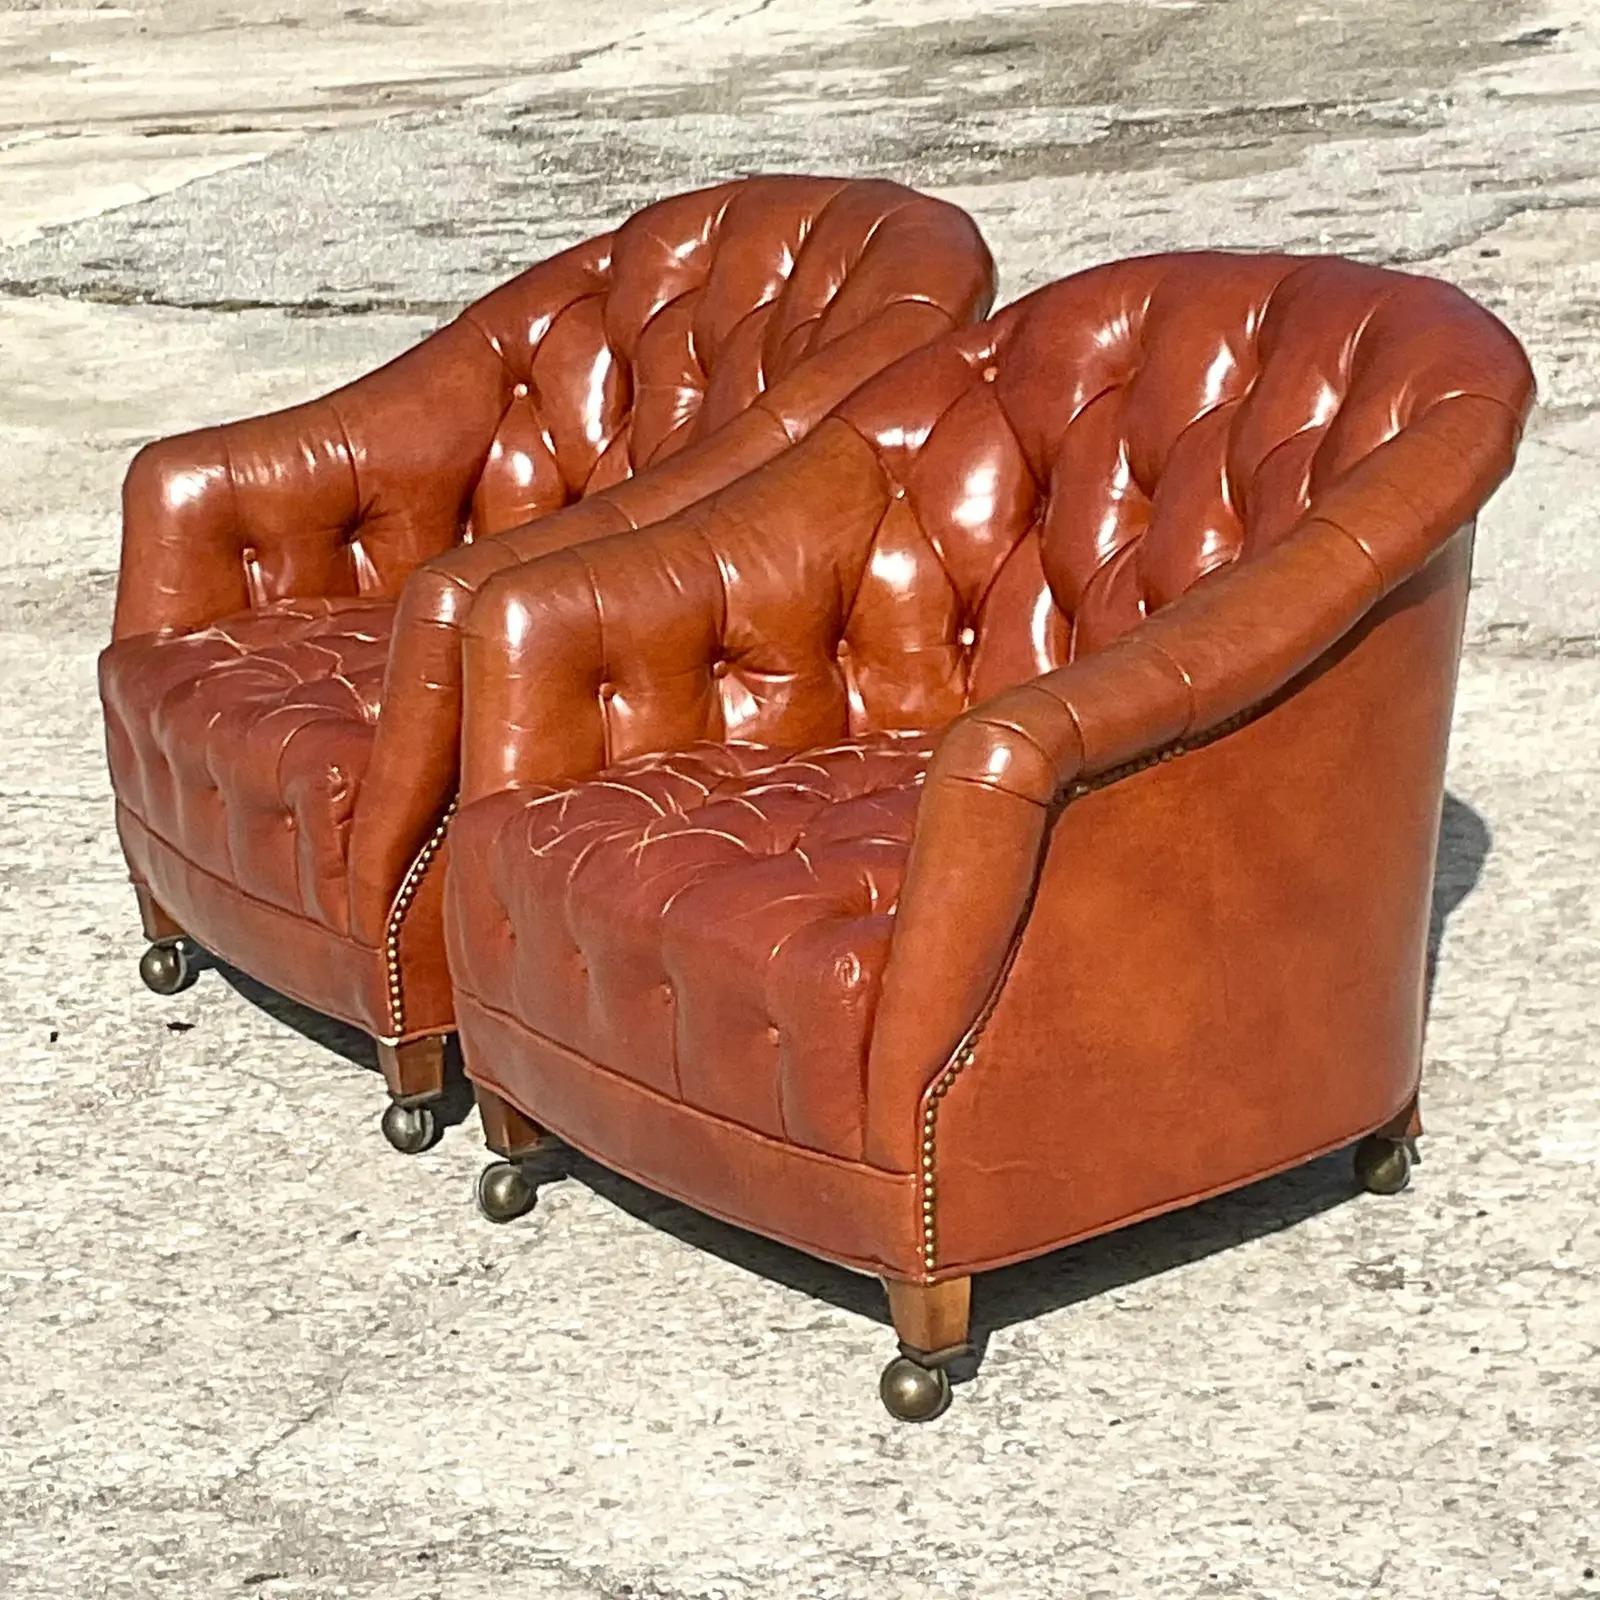 North American Vintage Regency Hickory Chair Tufted Leather Tub Chair on Casters, a Pair